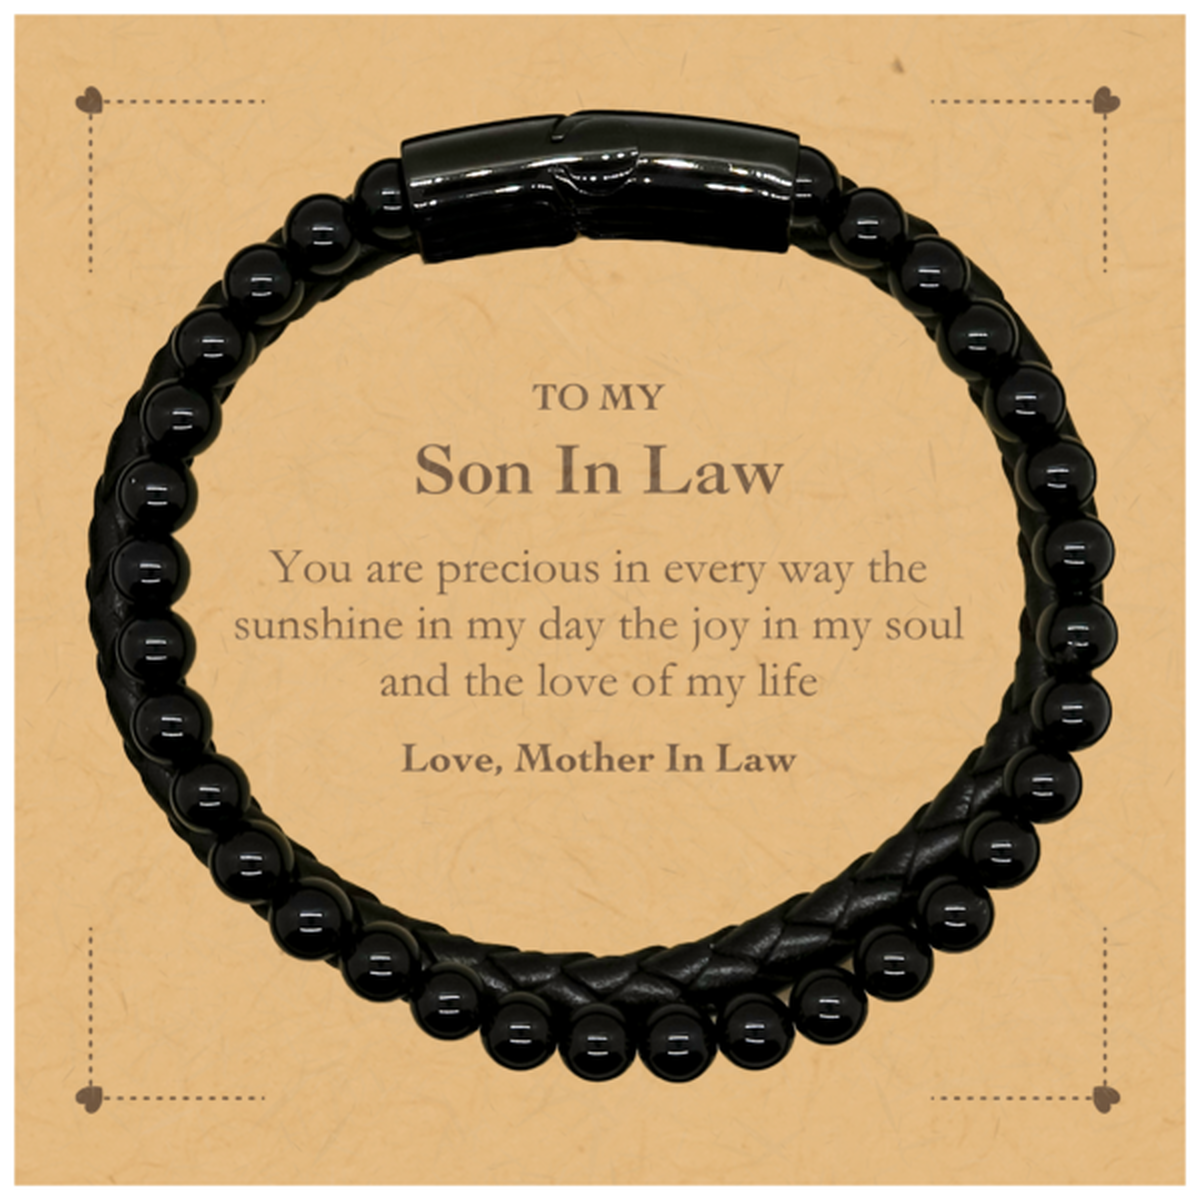 Graduation Gifts for Son In Law Stone Leather Bracelets Present from Mother In Law, Christmas Son In Law Birthday Gifts Son In Law You are precious in every way the sunshine in my day. Love, Mother In Law